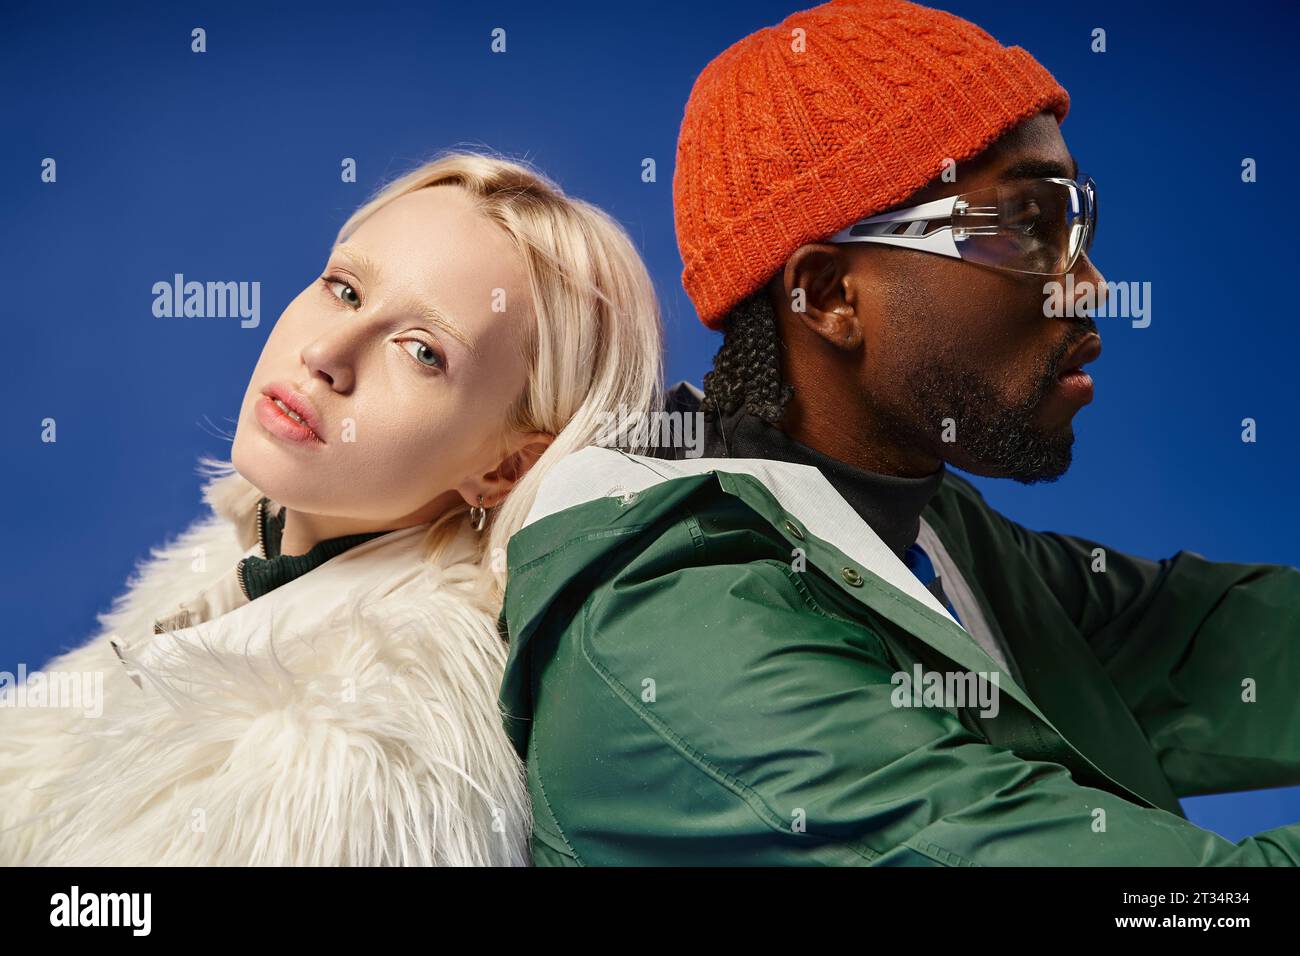 multicultural models in trendy winter outfits posing together on blue backdrop, diversity and style Stock Photo